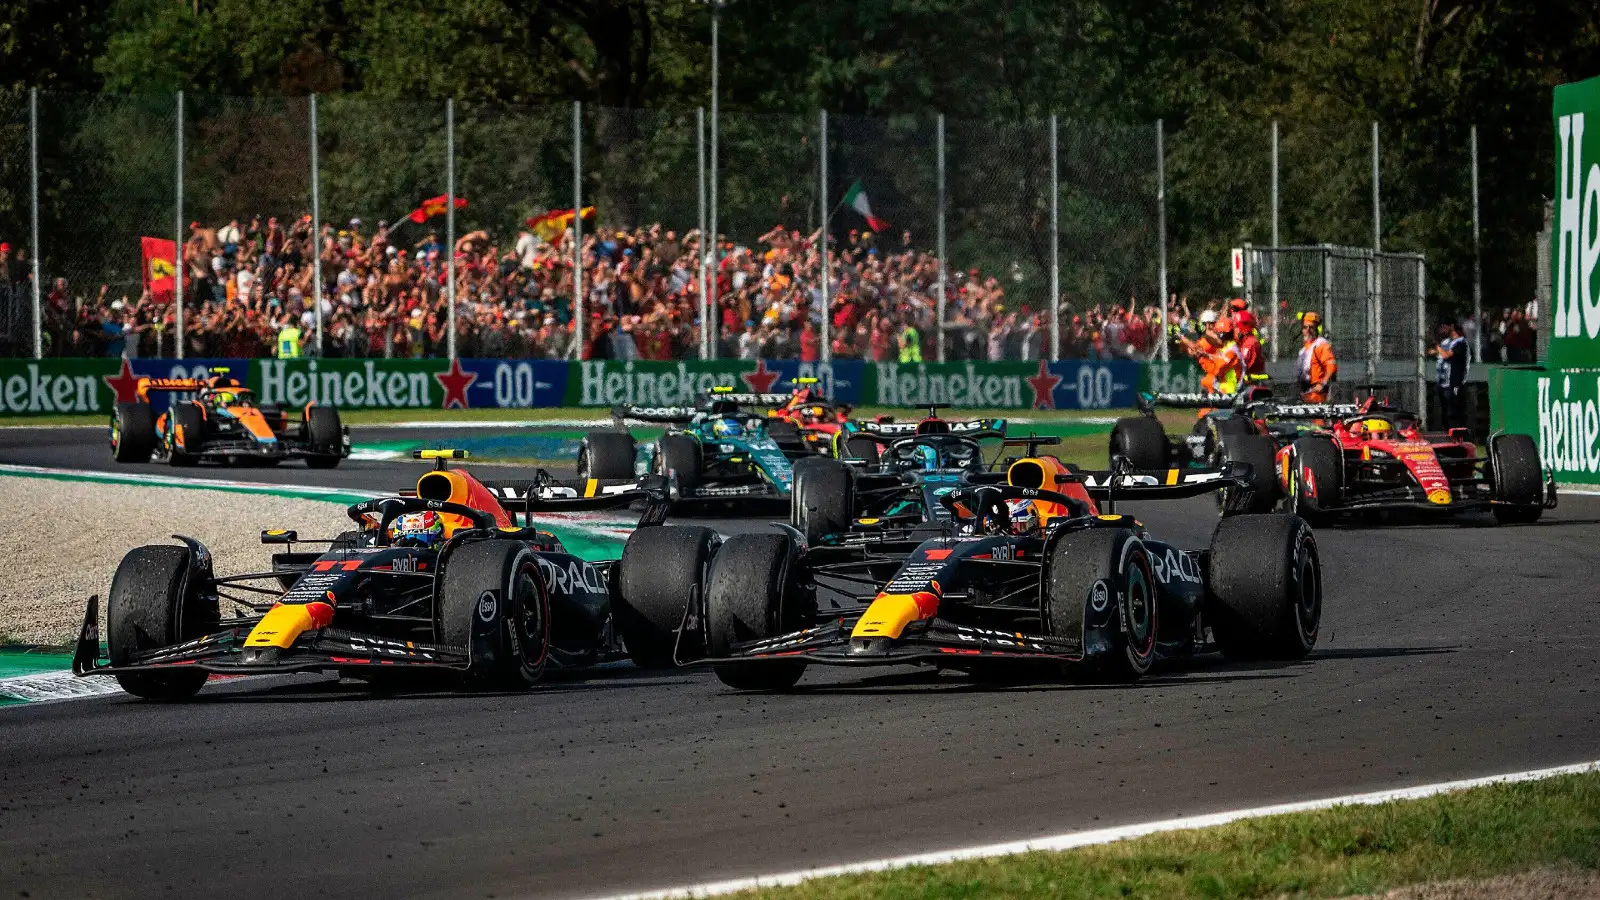 Red Bull's Max Verstappen and Sergio Perez finished 1-2 at the Italian Grand Prix.